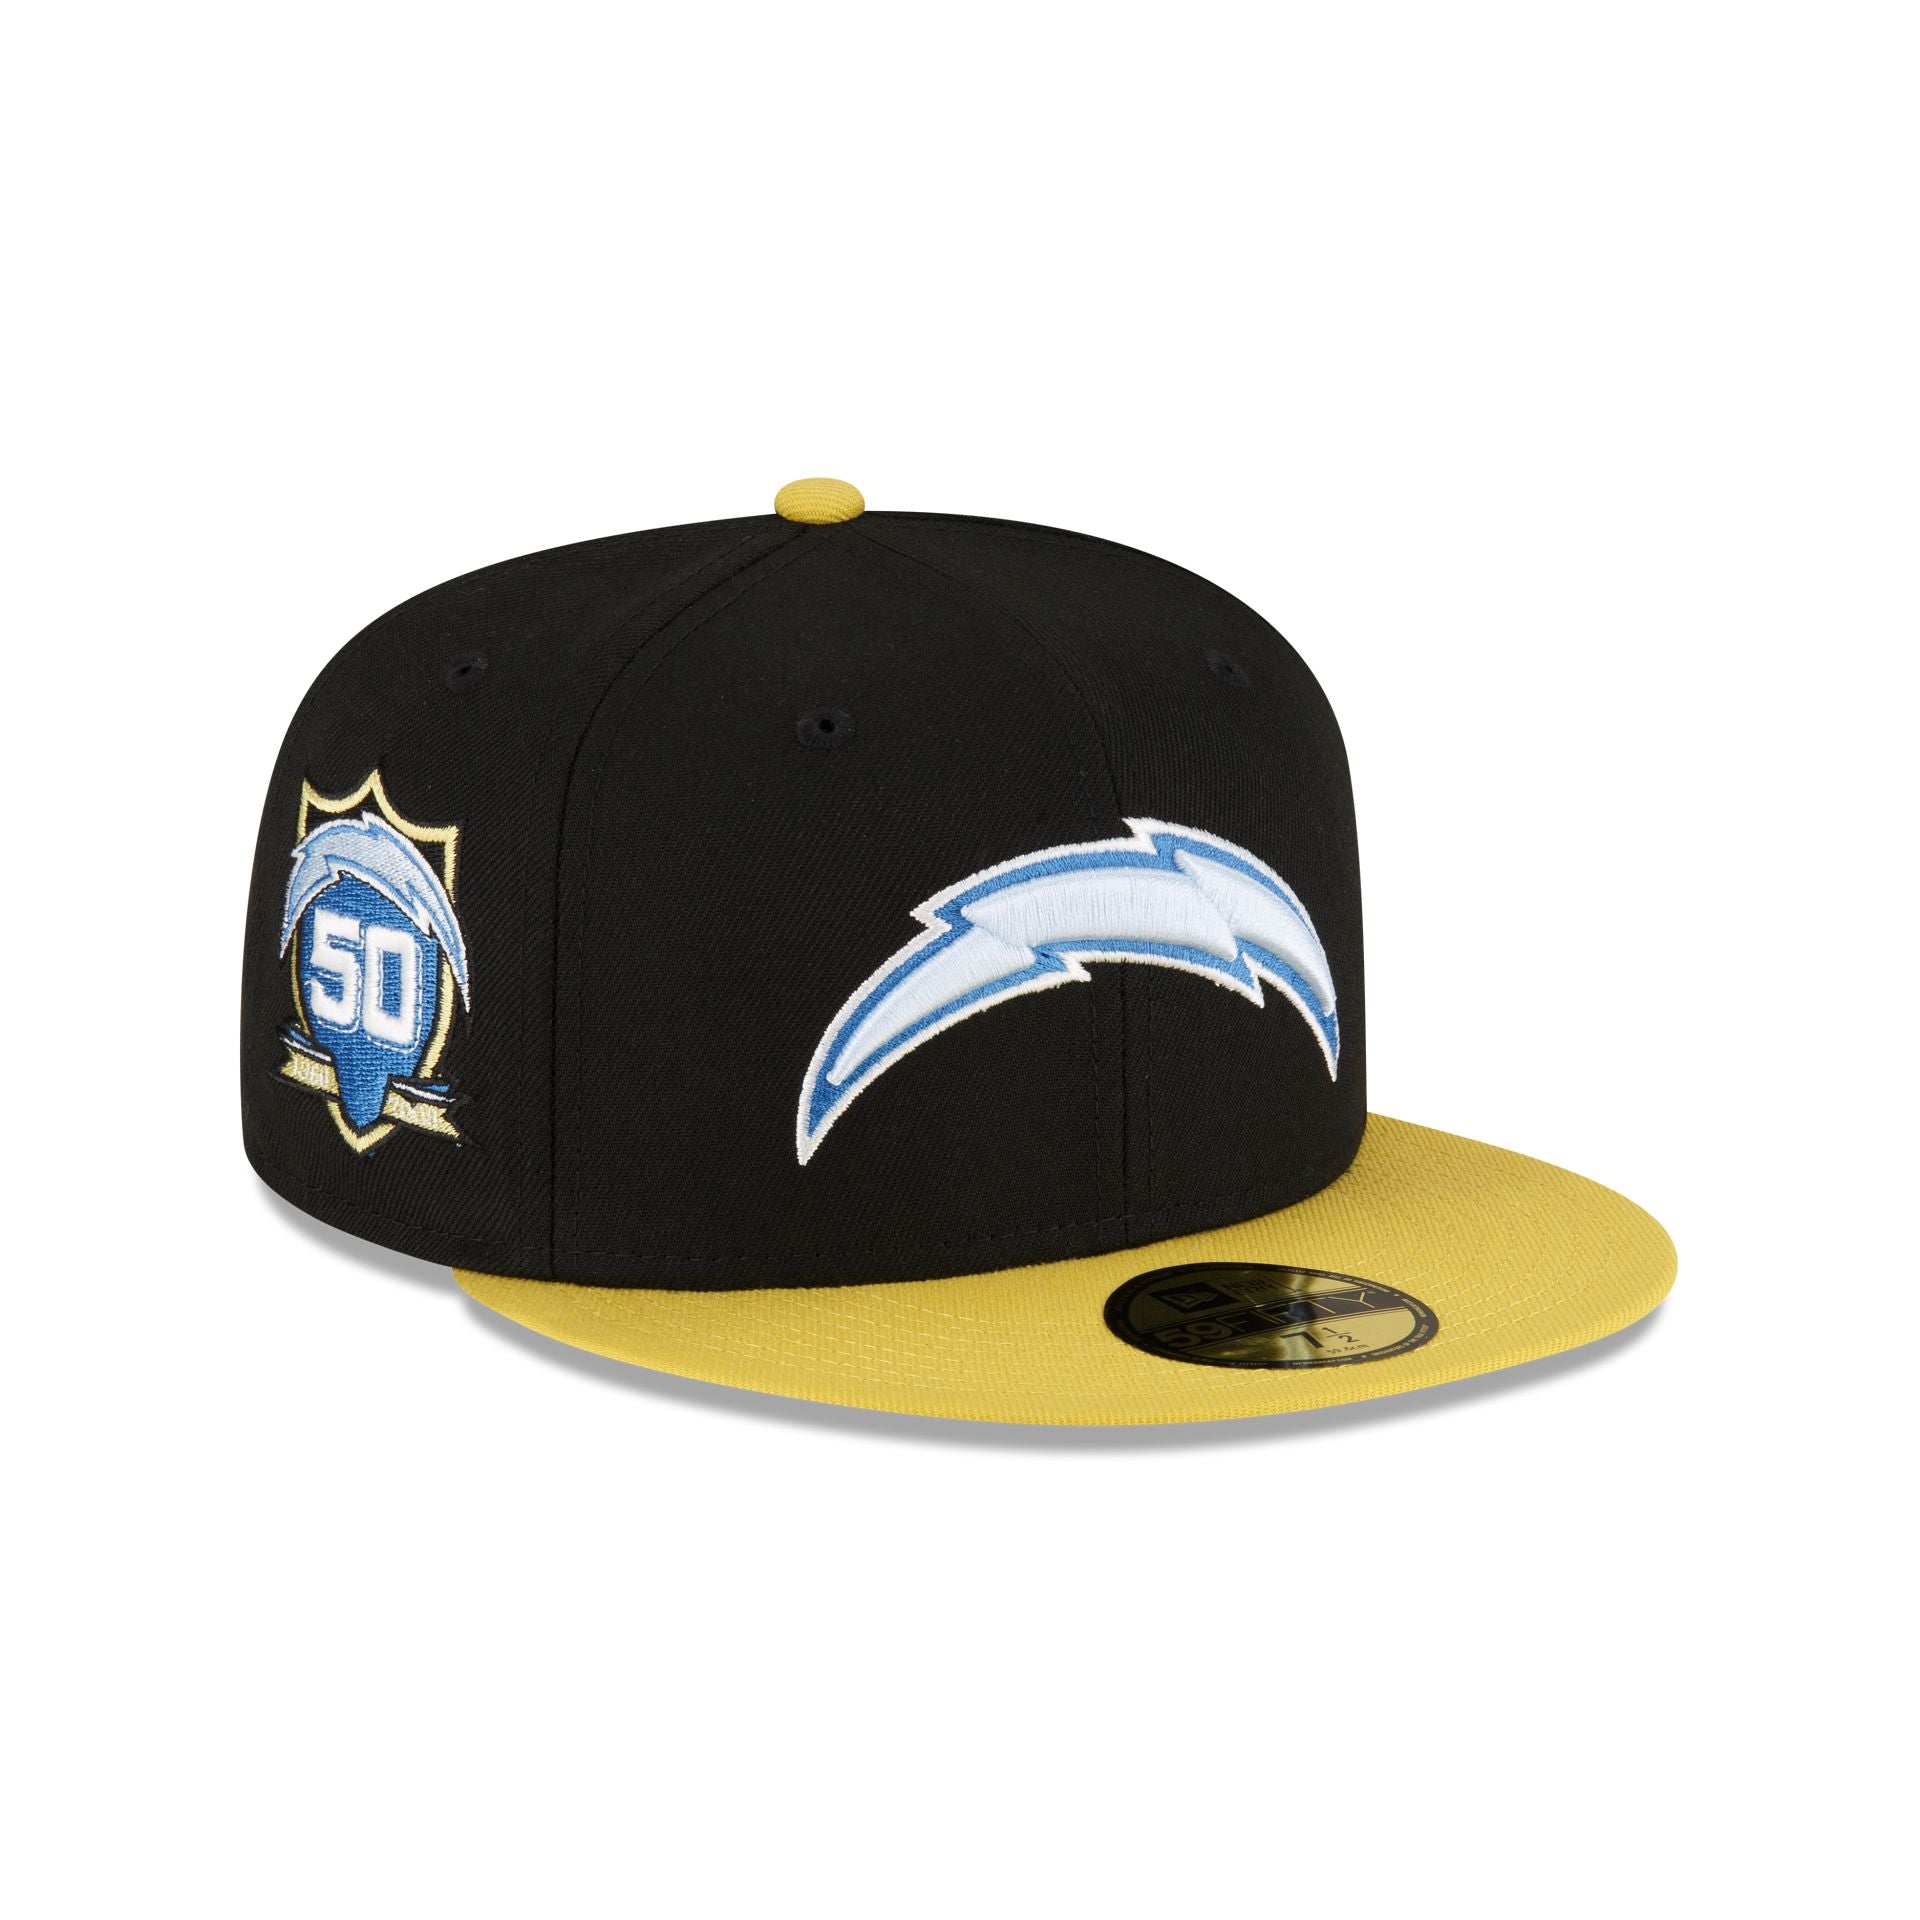 chargers draft hat 2020